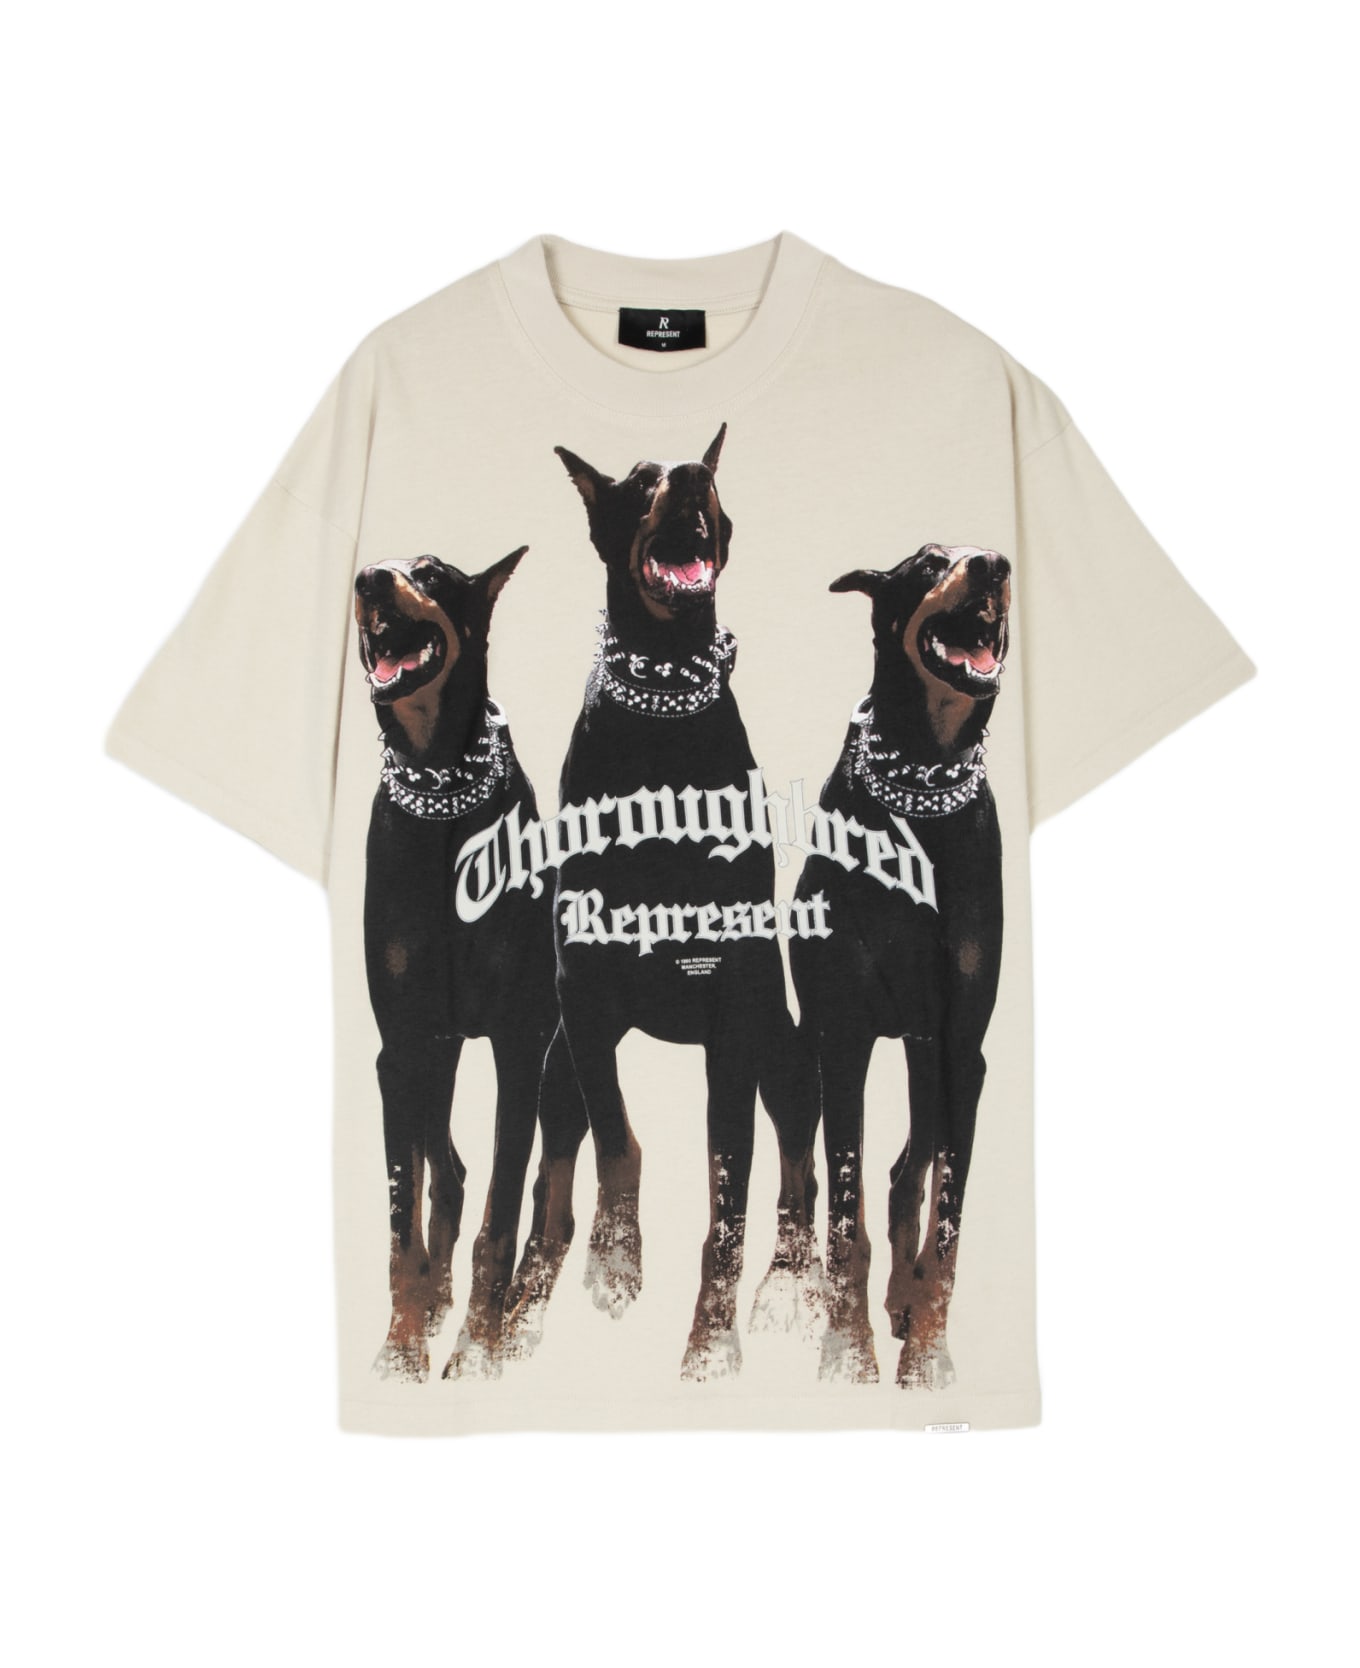 REPRESENT Horoughbred T-shirt Off white t-shirt with graphic print - Horoughbred T-shirt - Crema シャツ